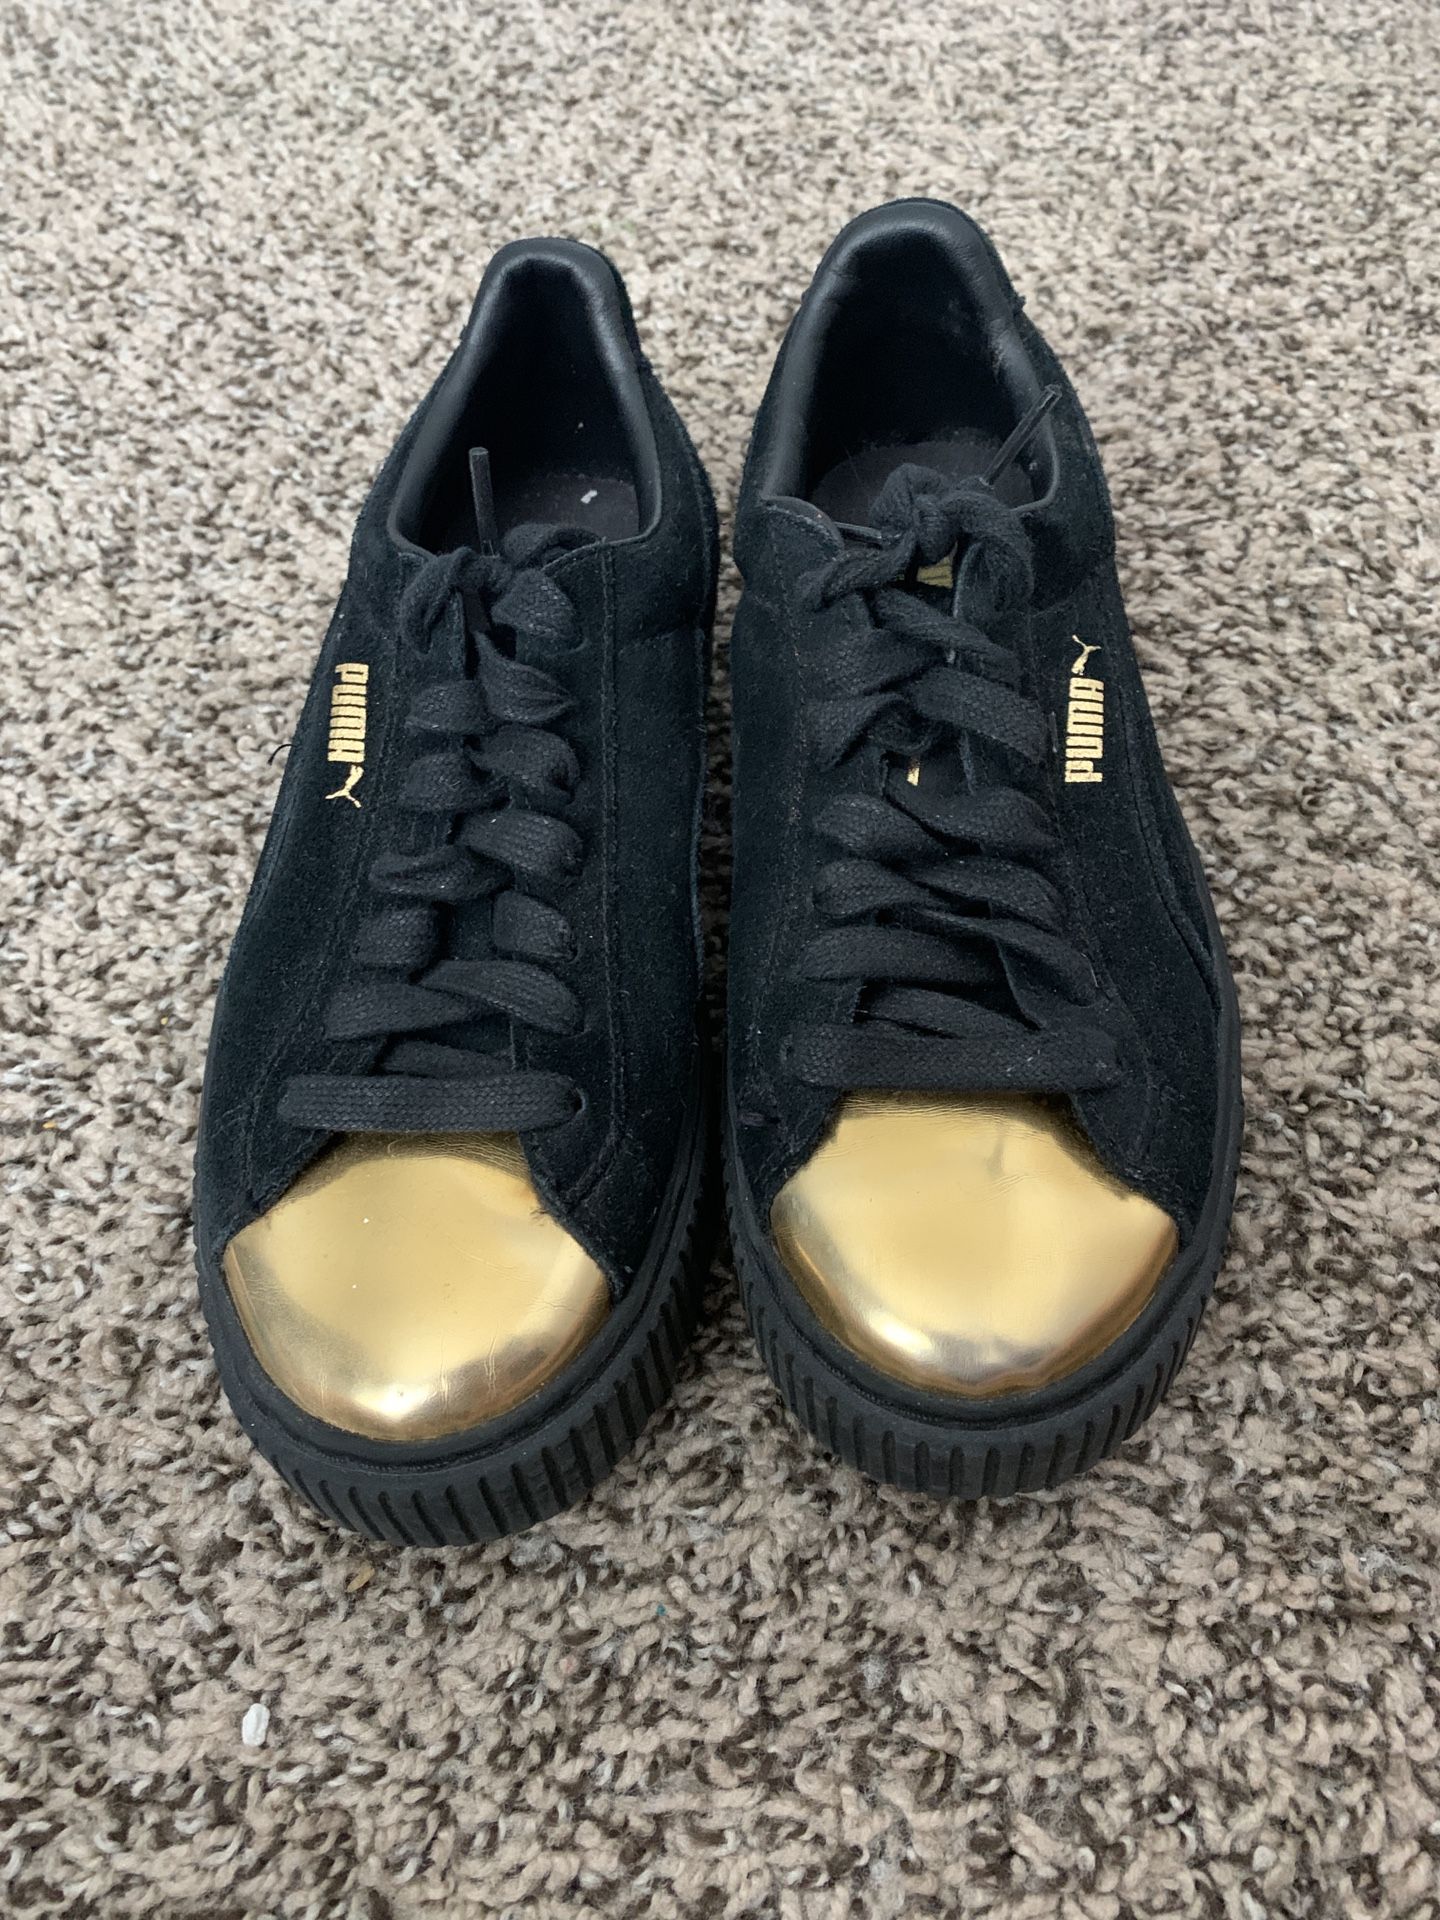 Black and gold pumas size 7